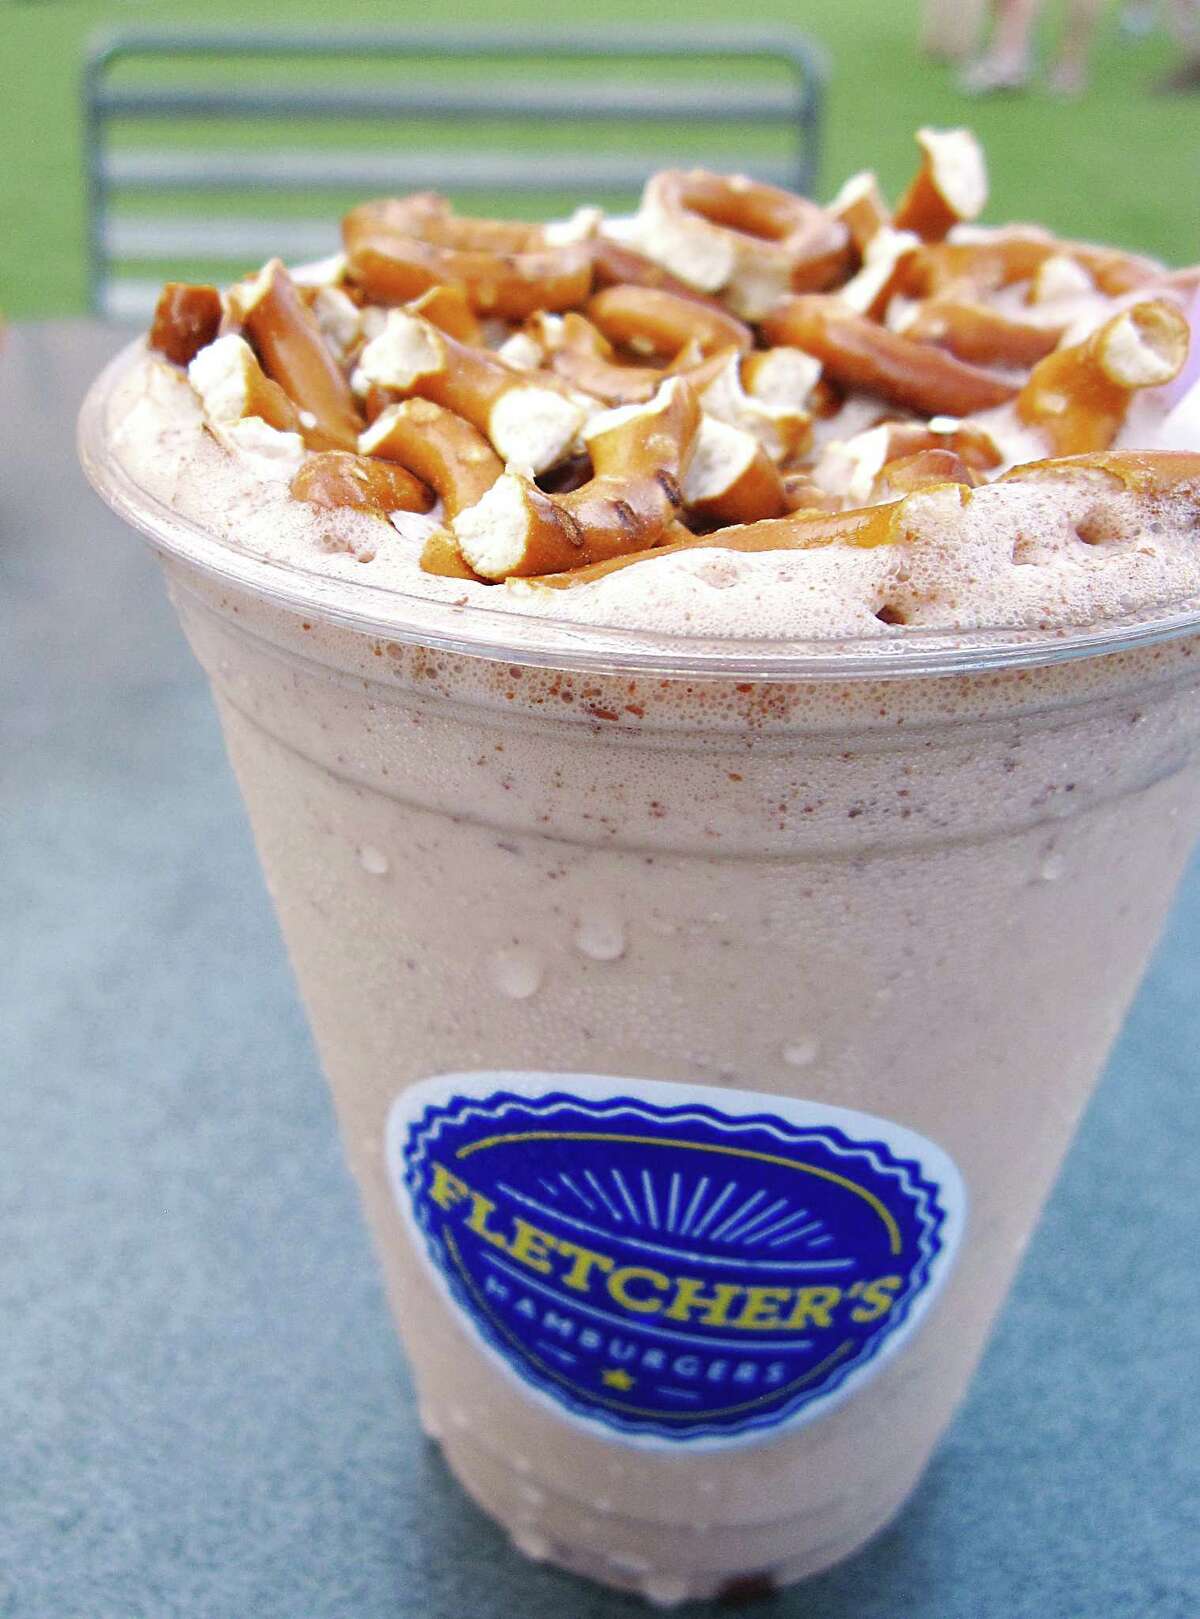 A Nutella milkshake with pretzels from Fletcher's Hamburgers will be part of the $4 happy hour specials.